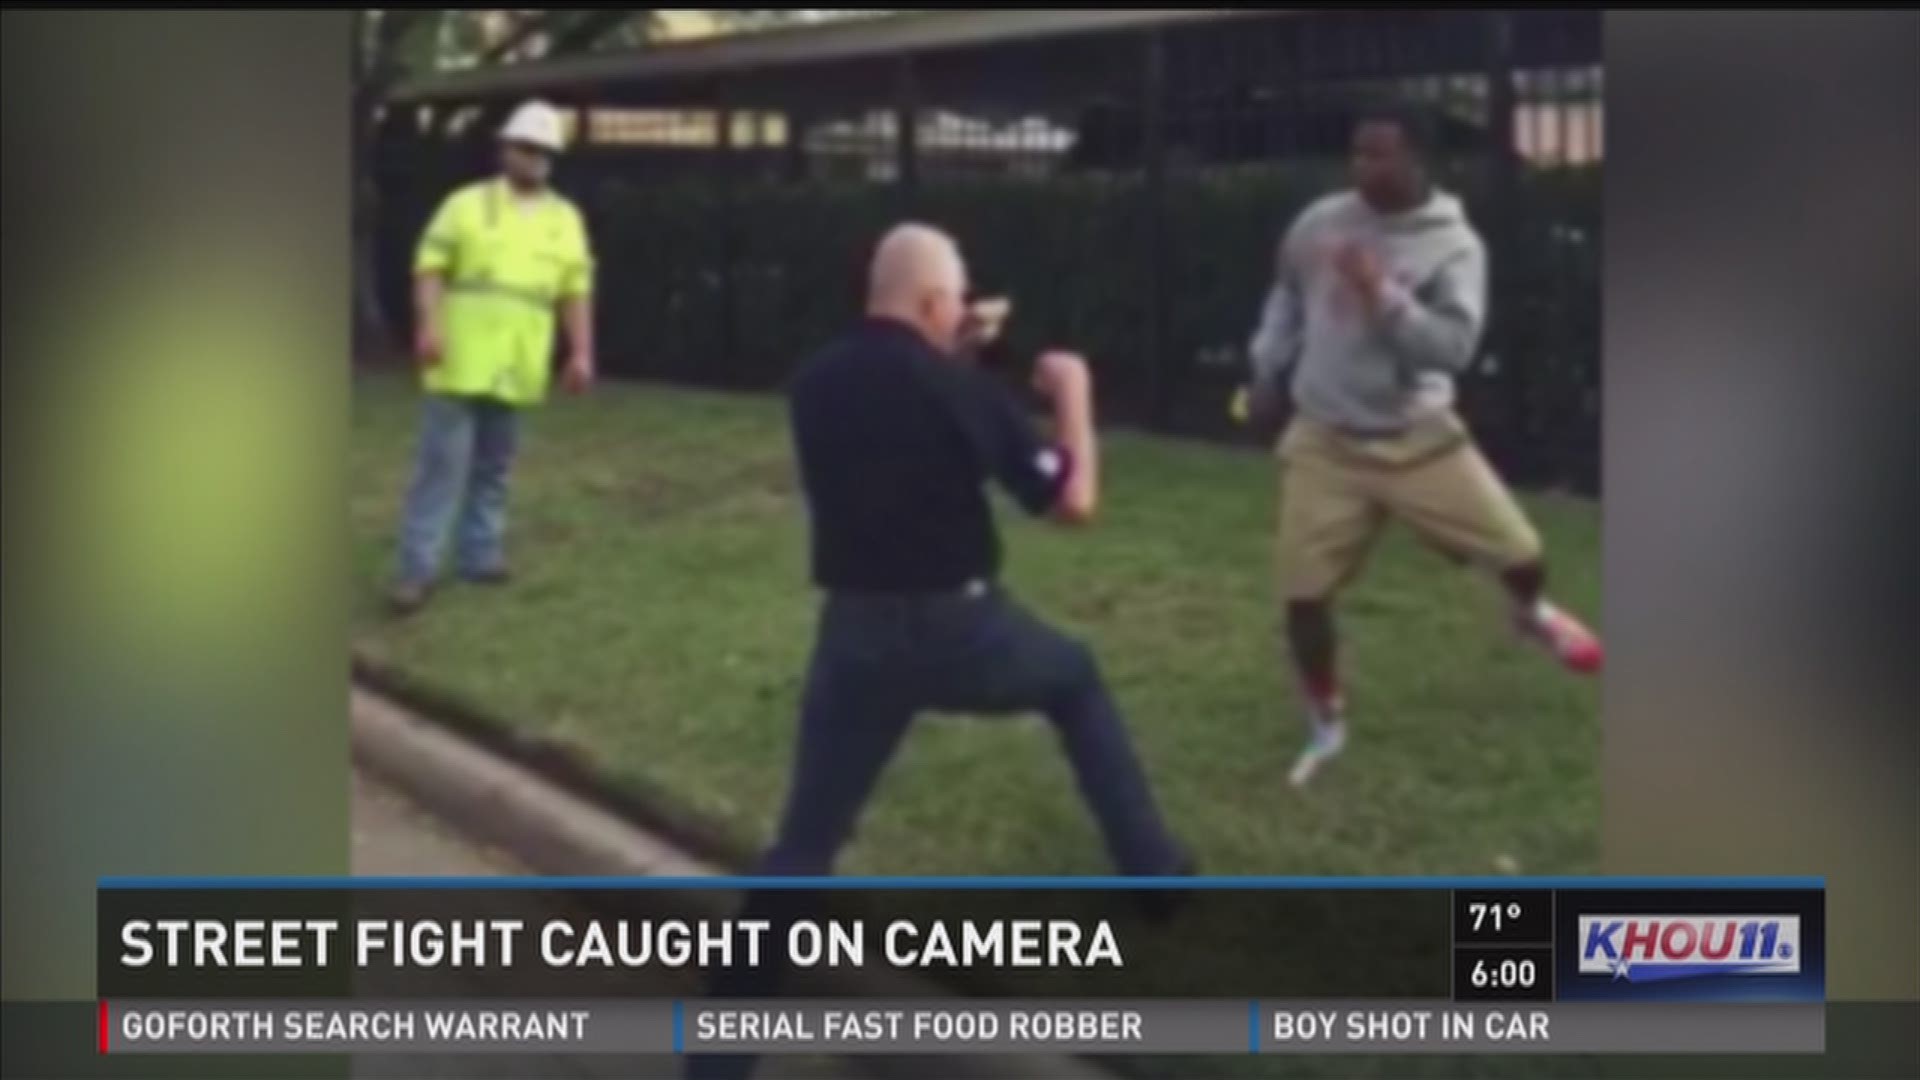 clement arthur share street fights caught on video photos